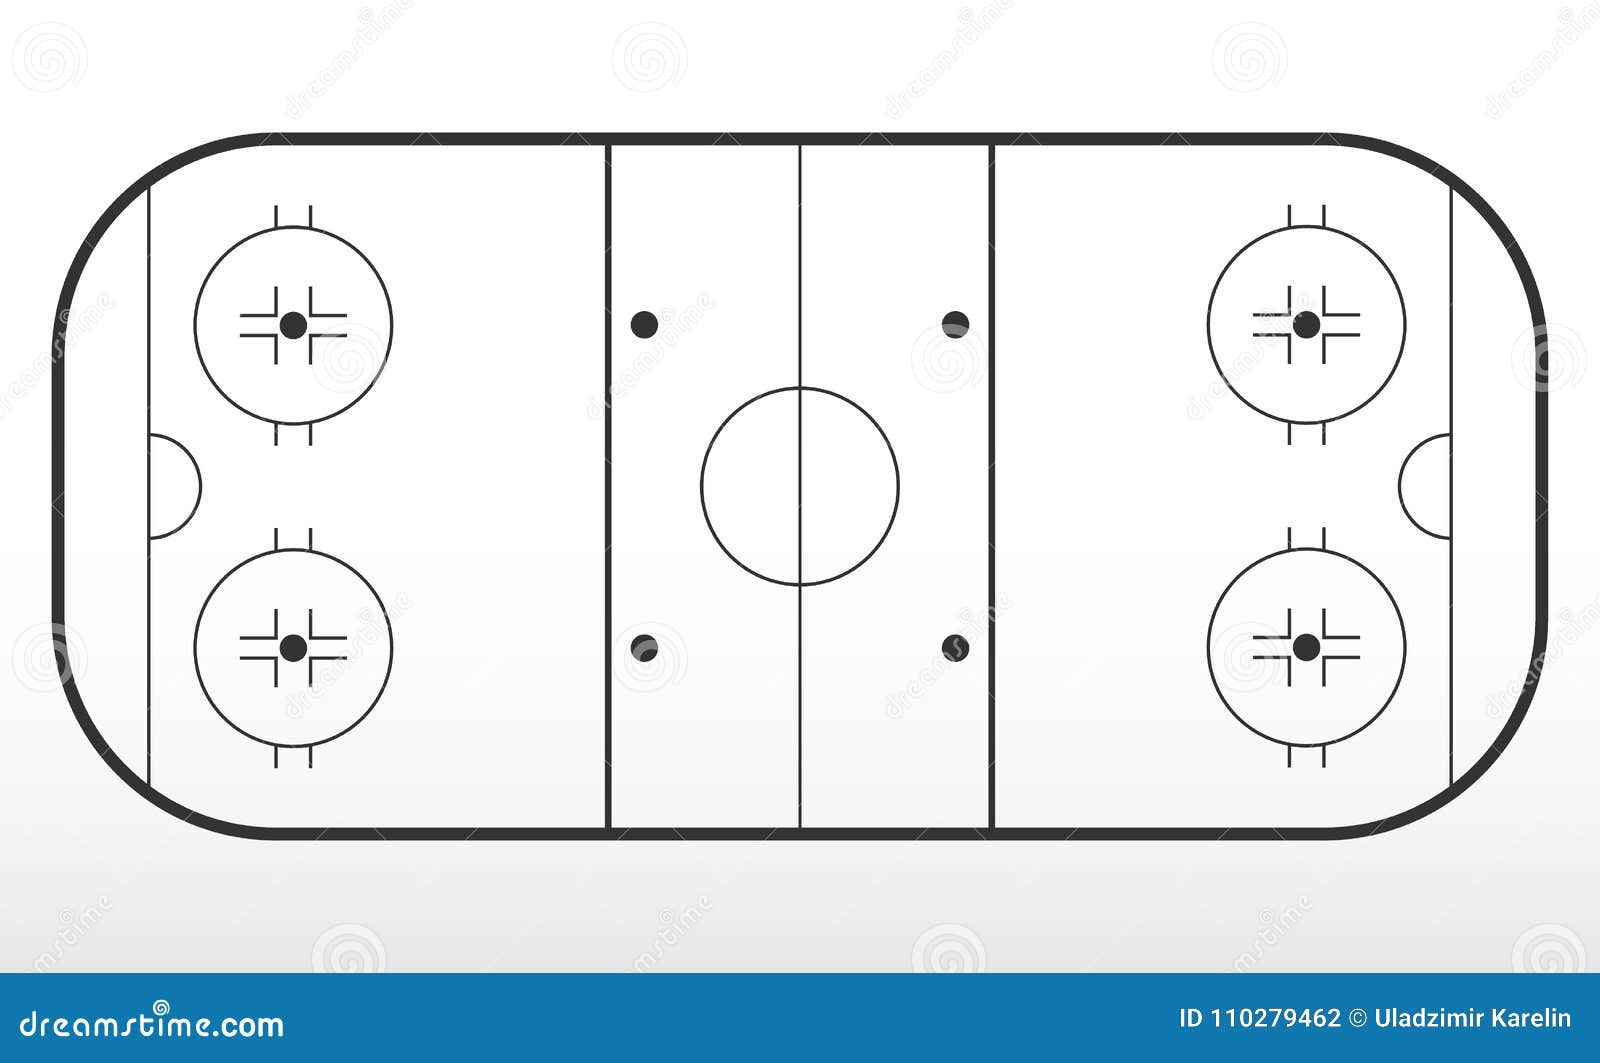 Outline Of Lines On An Ice Hockey Rink. 